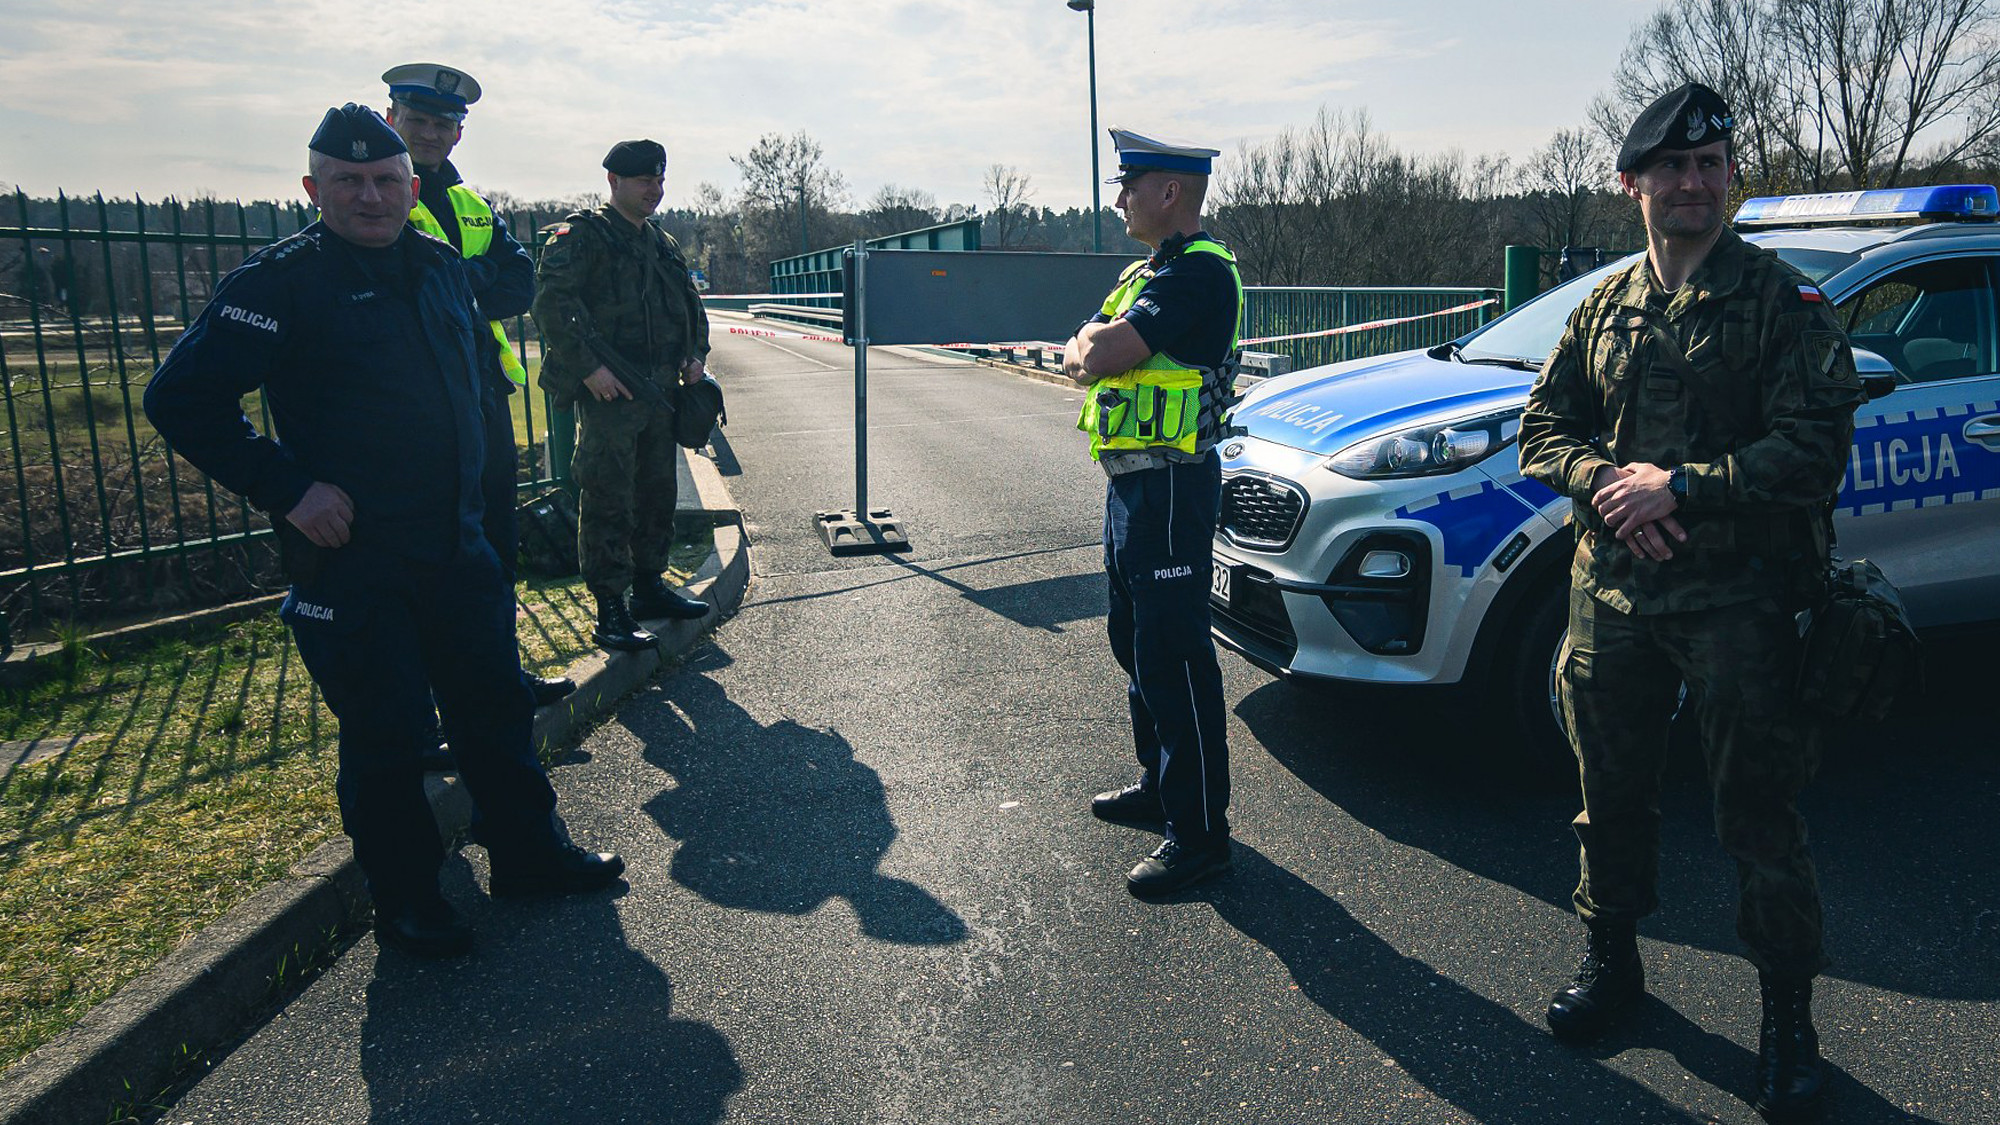 Joint patrols of soldiers and policemen